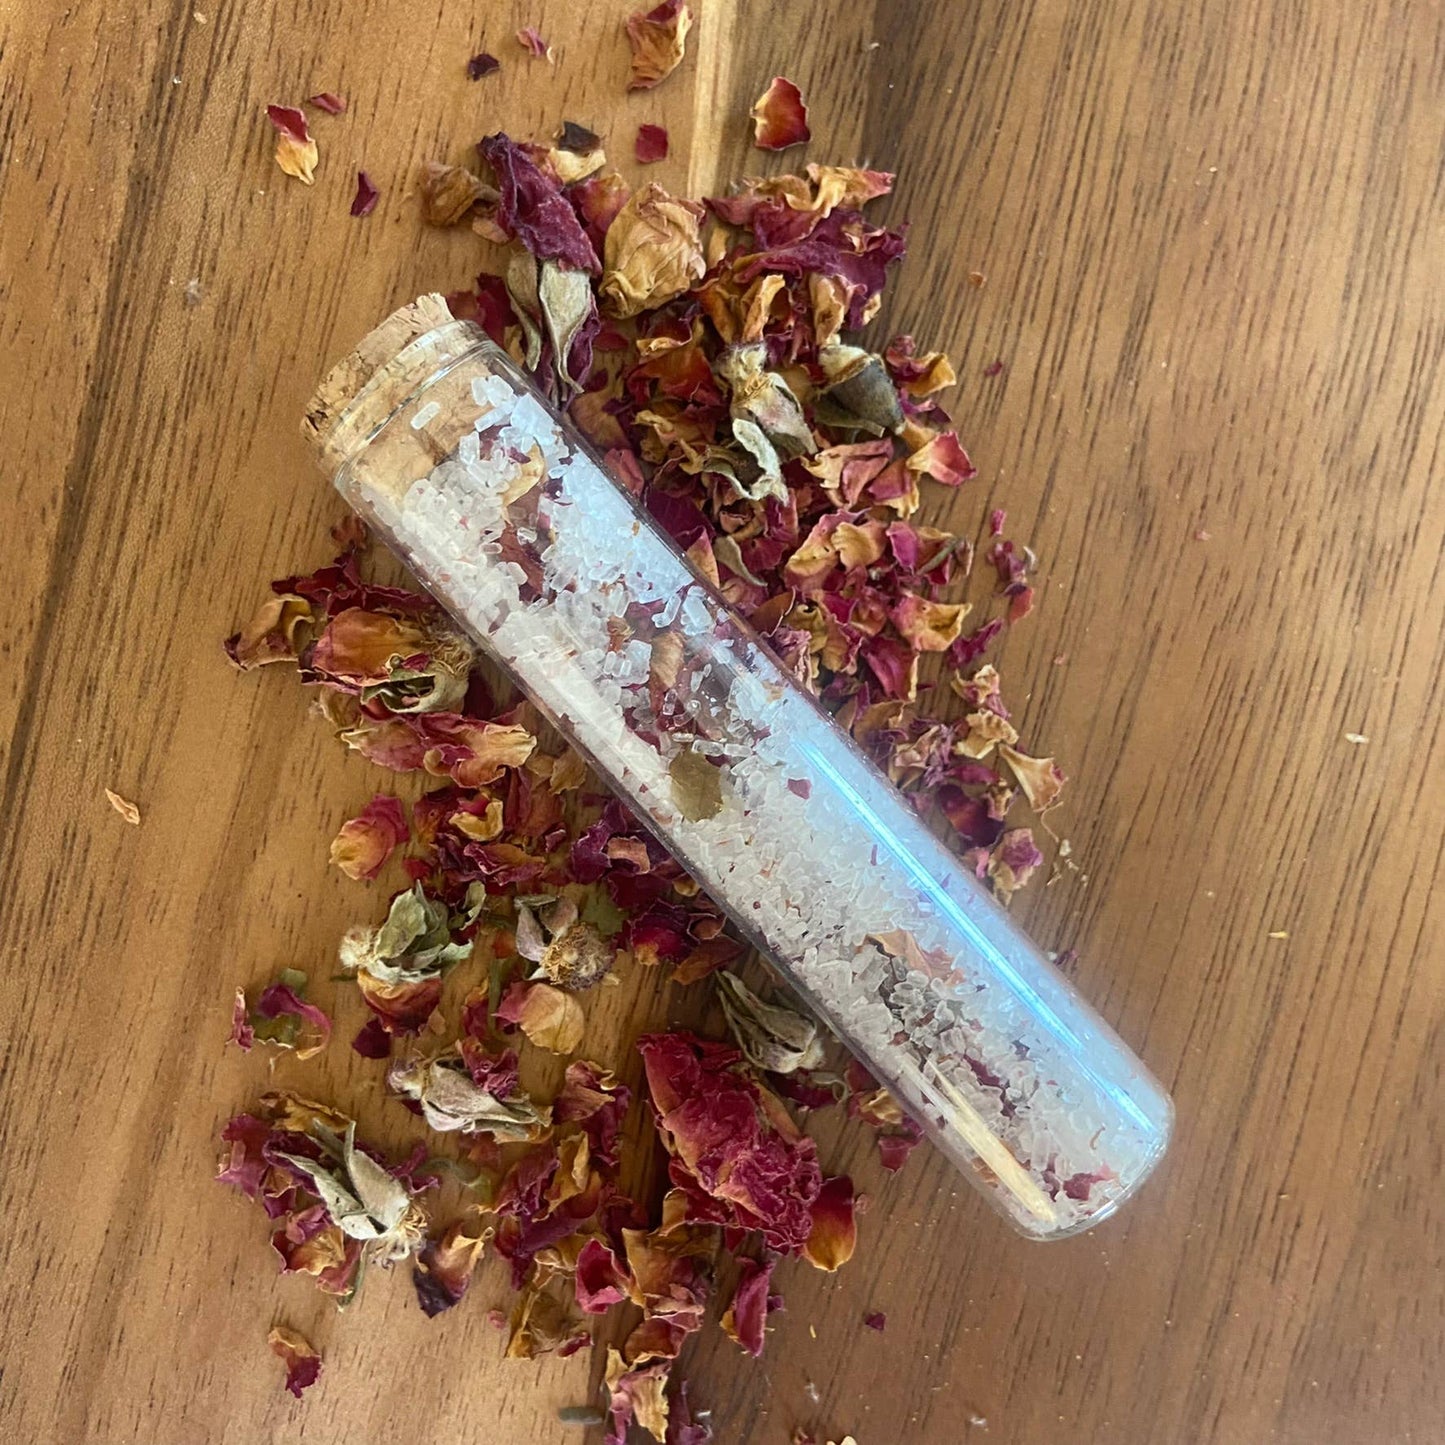 Herbal Bath Salts Test Tubes | Made With Dried Rose Petals - Storm and Sky Shoppe